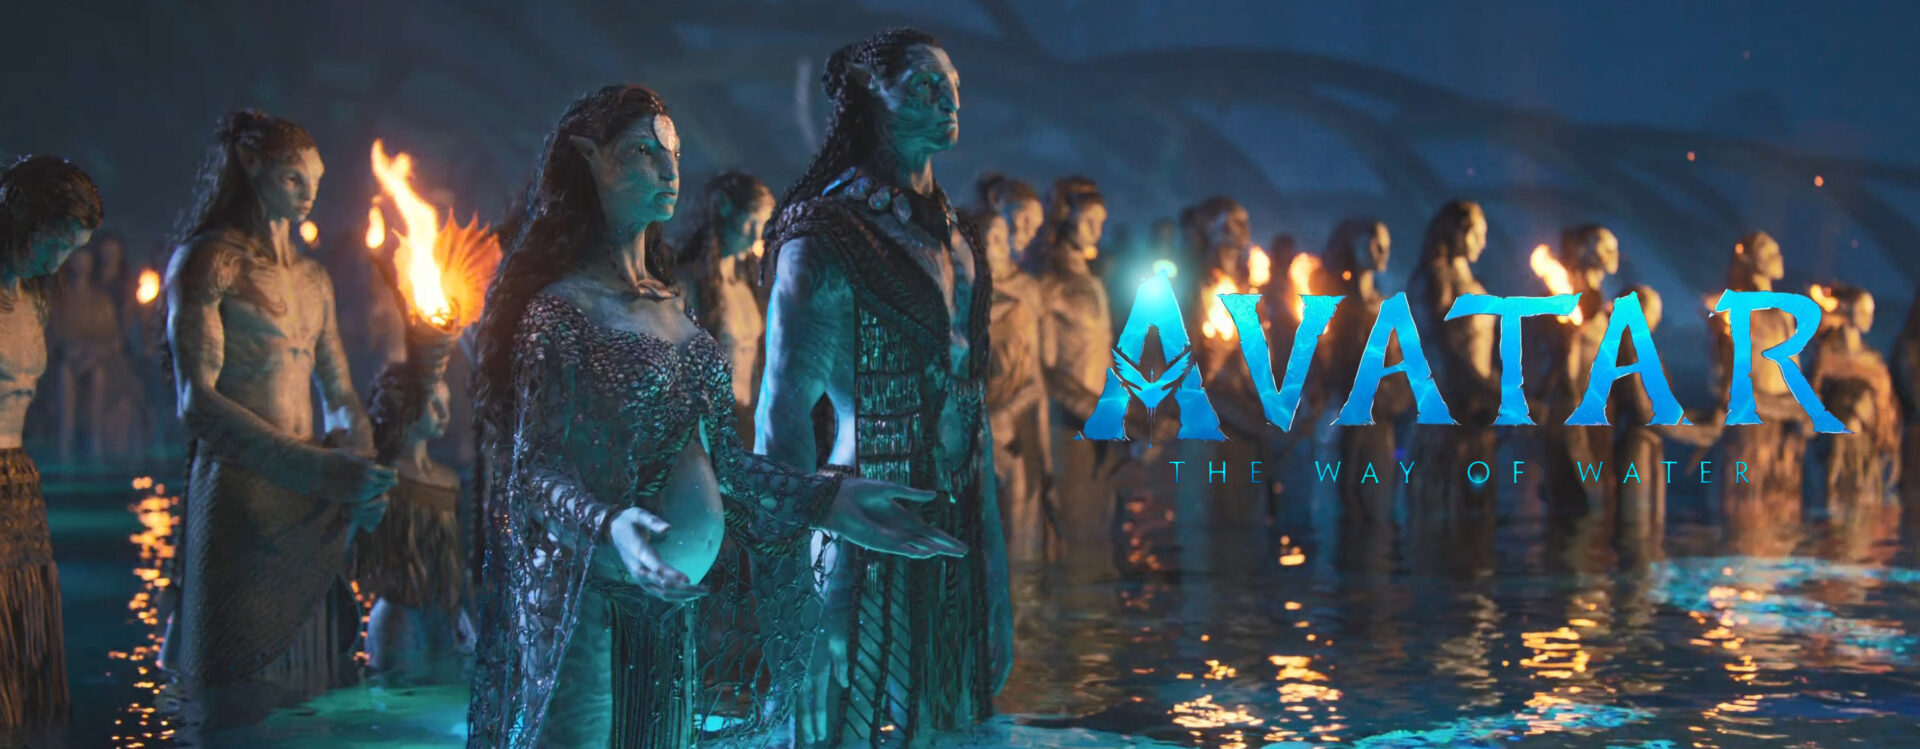 avatar the way of water teaser trailer banner